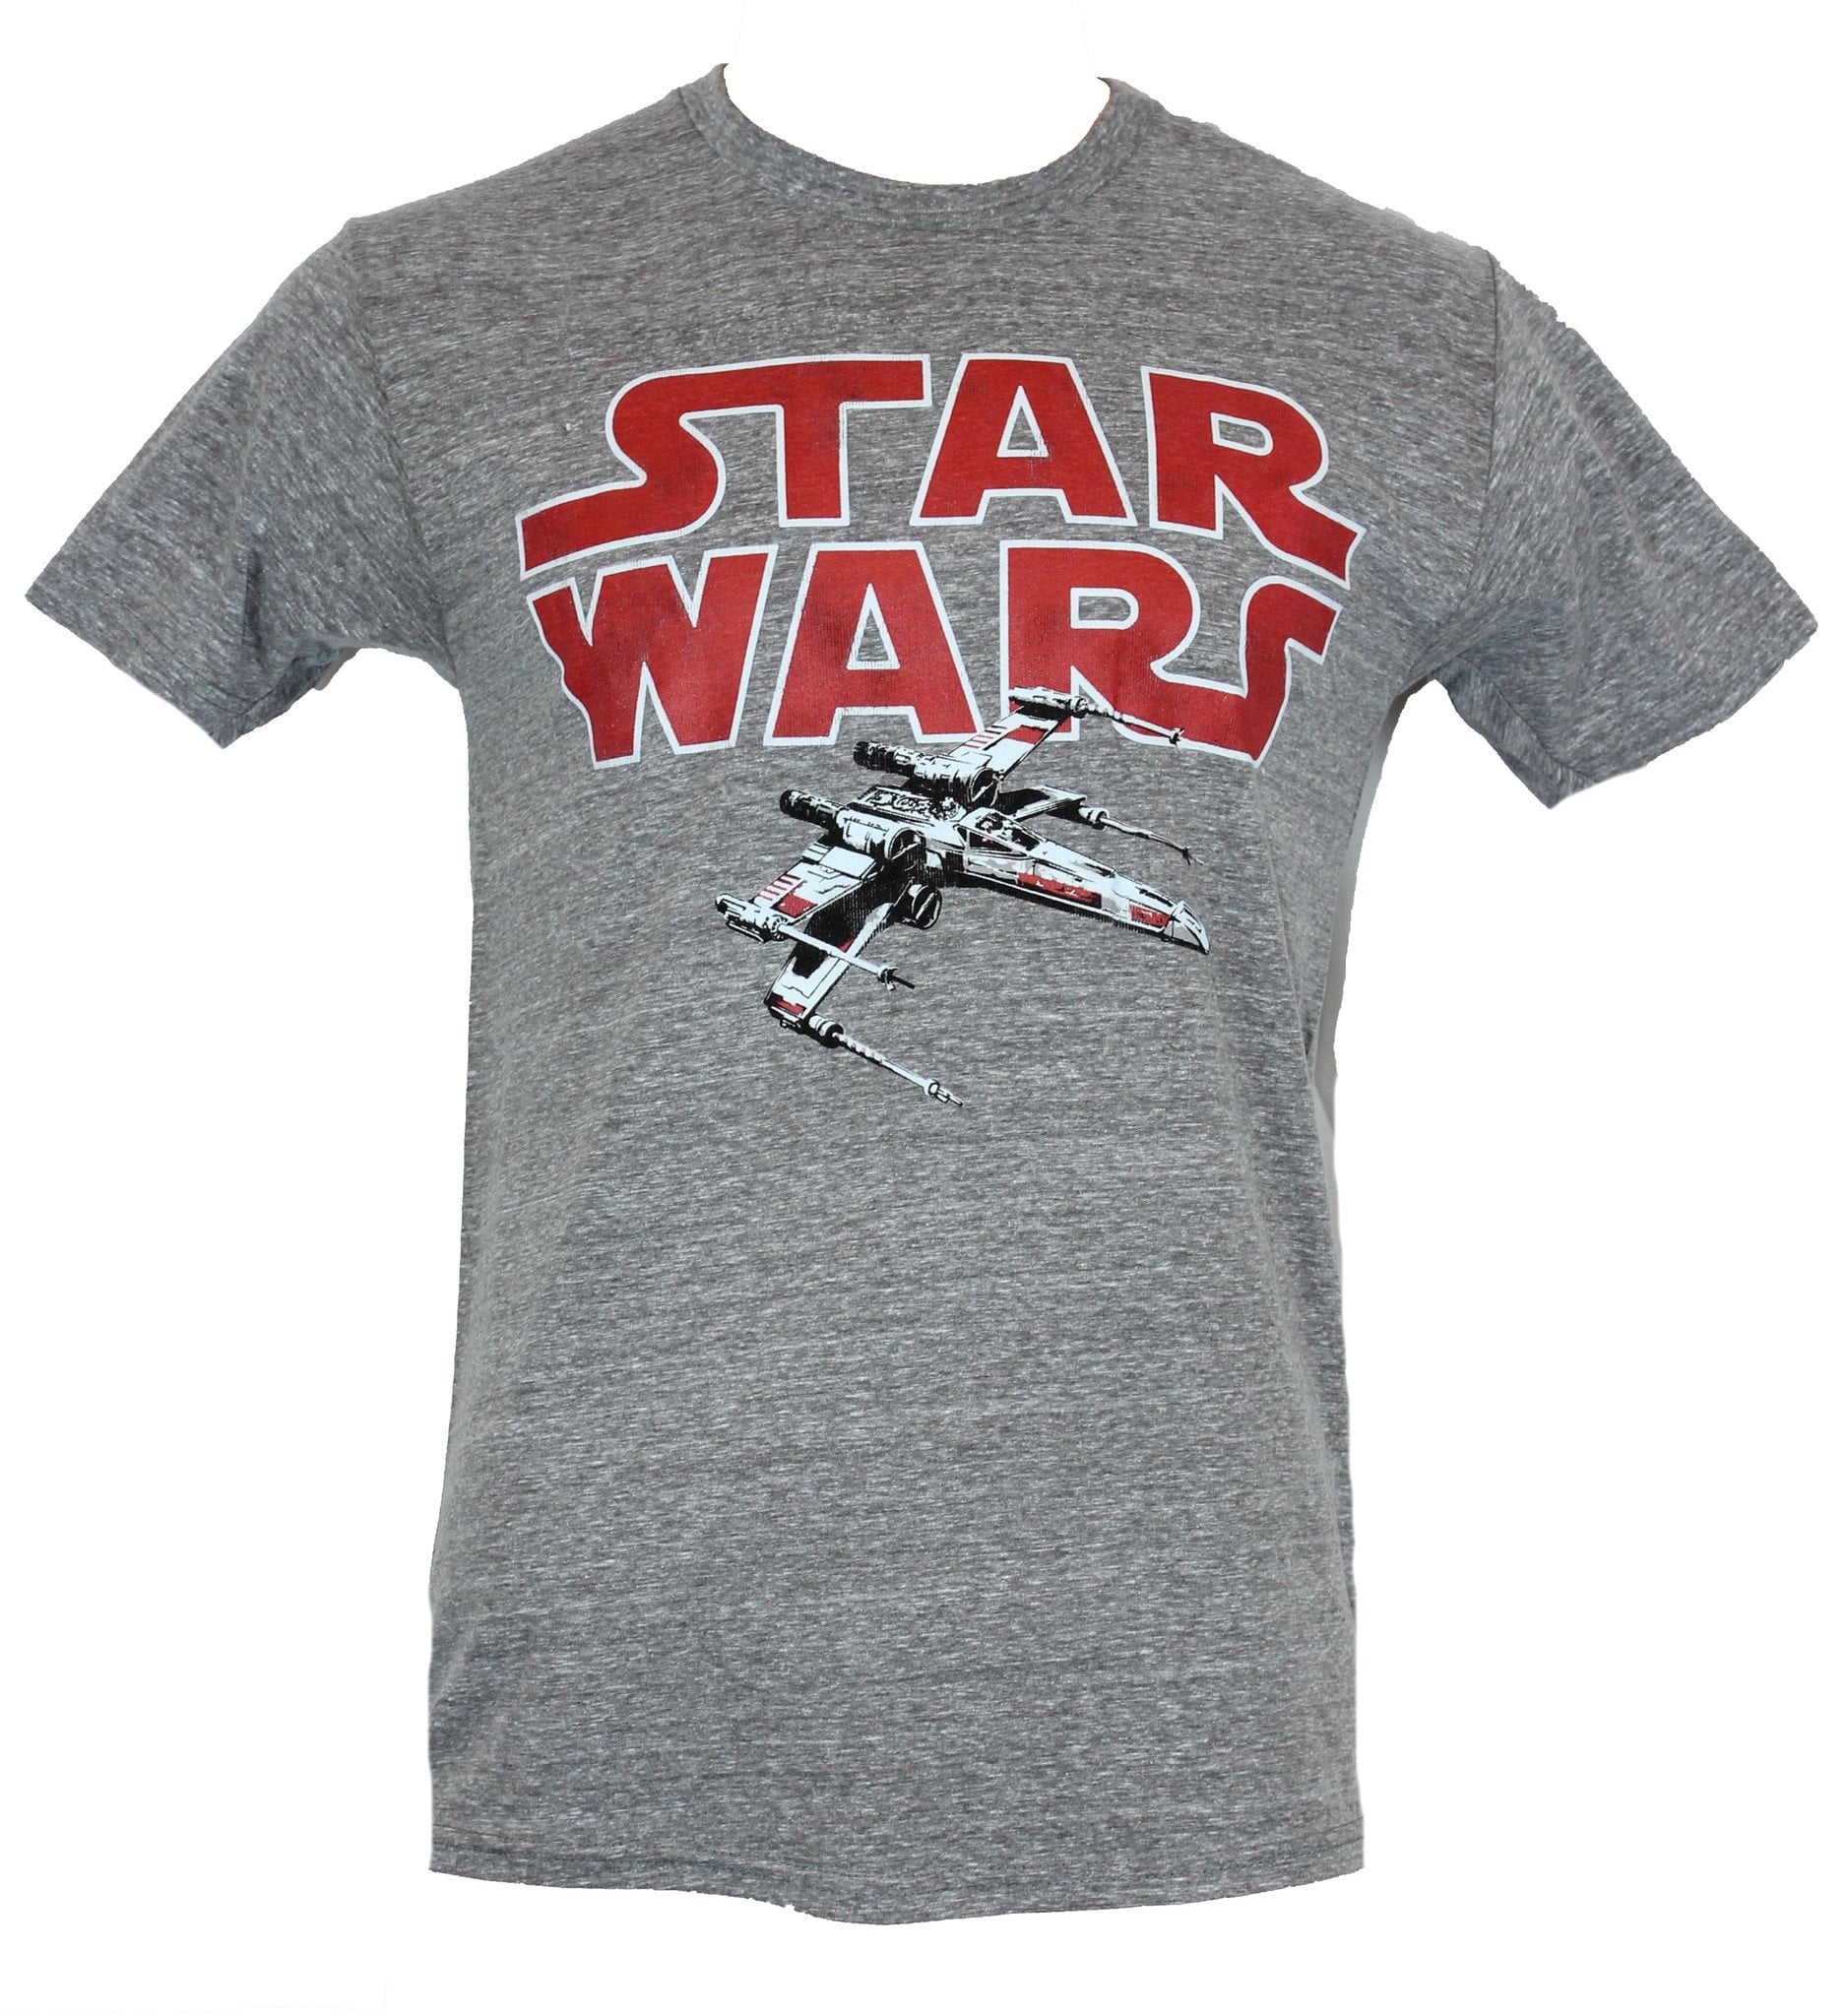 Star Wars Mens T-Shirt - Classic Red Logo Over X-Wing Image (2X-Large